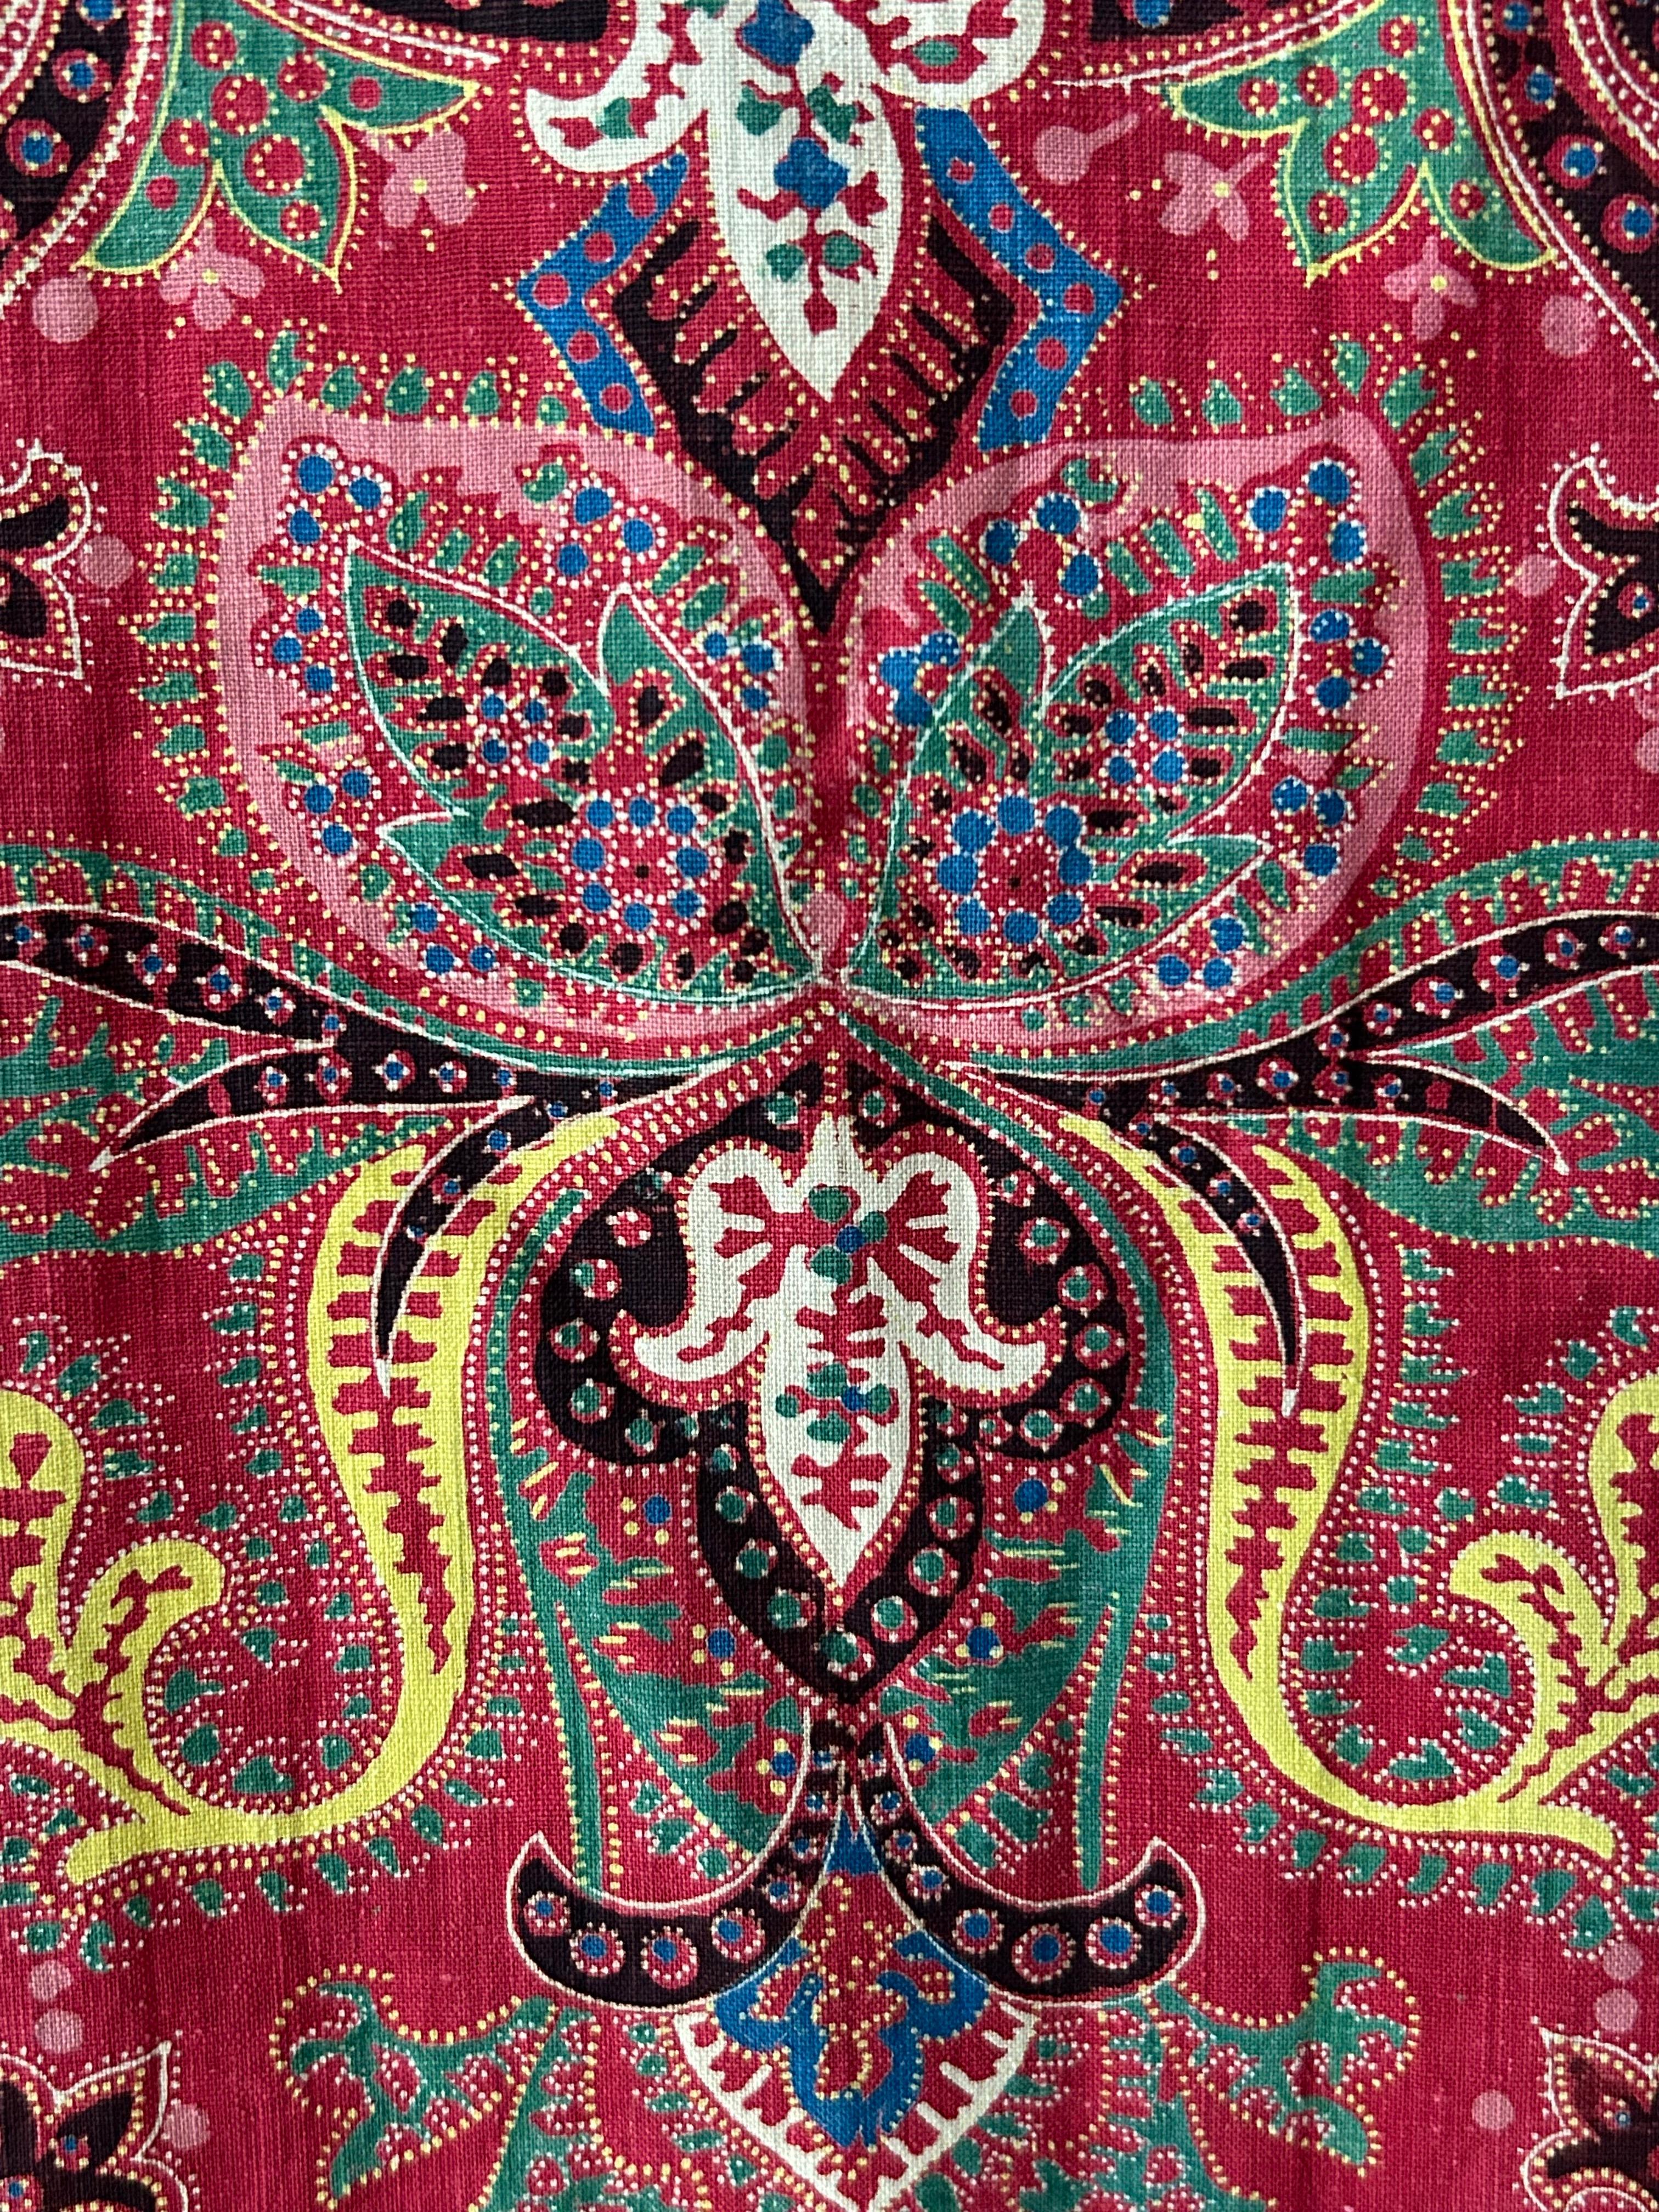 Large Antique Paisley Curtain Textile in Red with Pattern, France, 19th Century For Sale 1